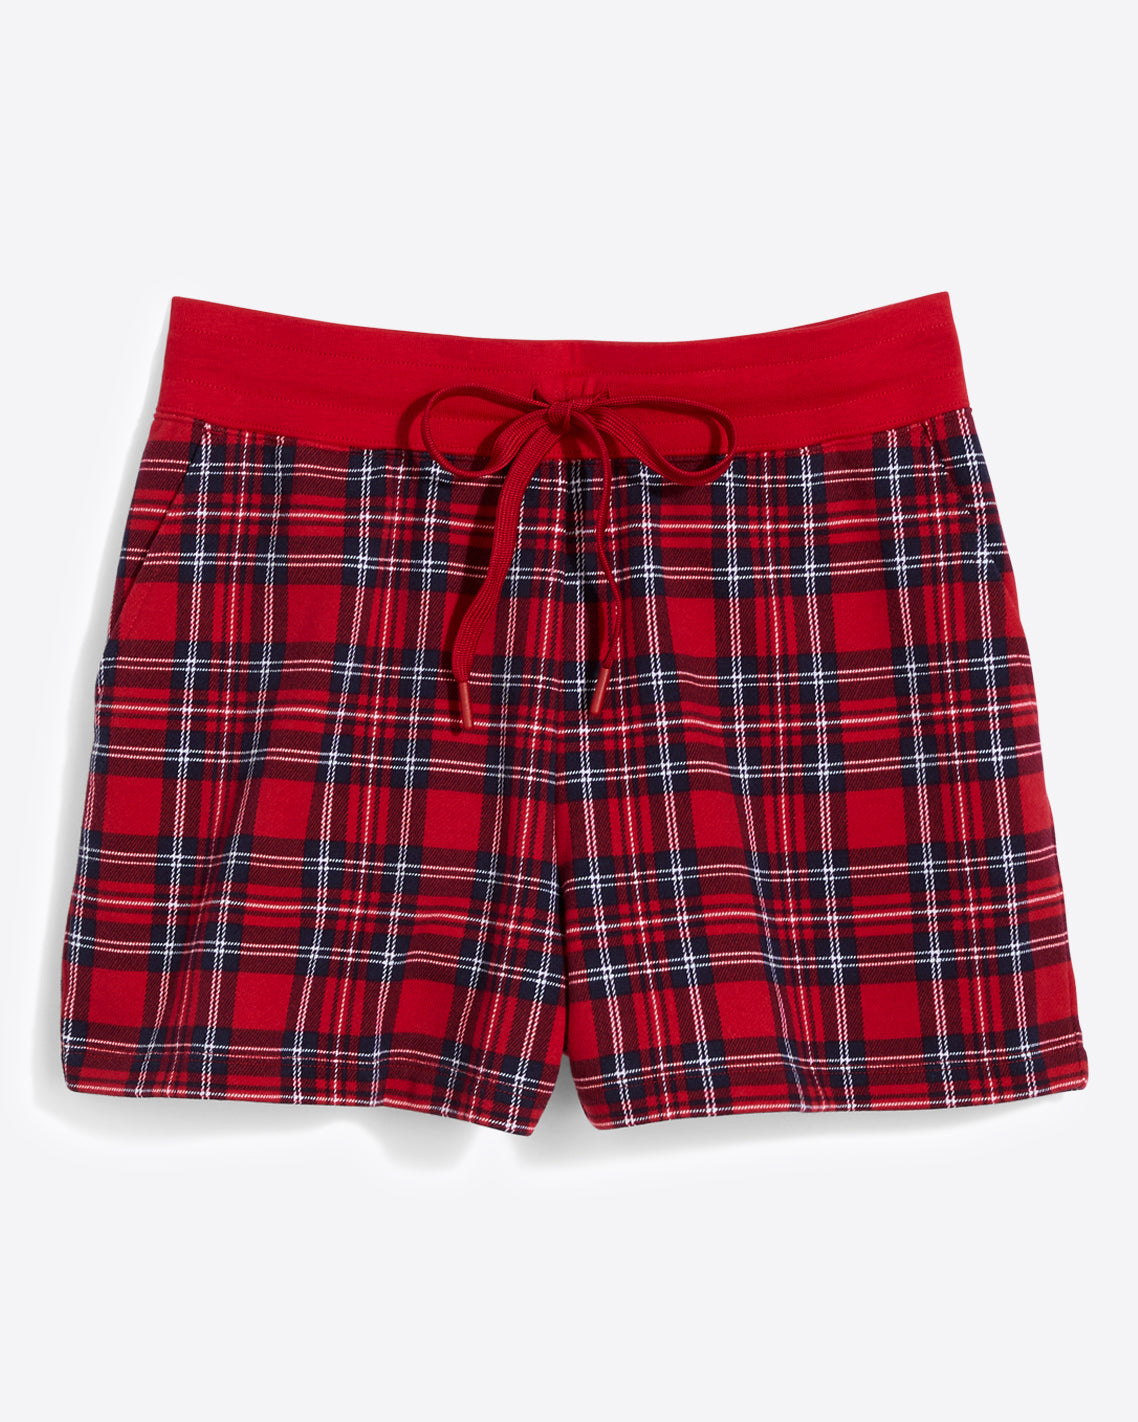 Natalie Sweat Shorts in Angie Plaid